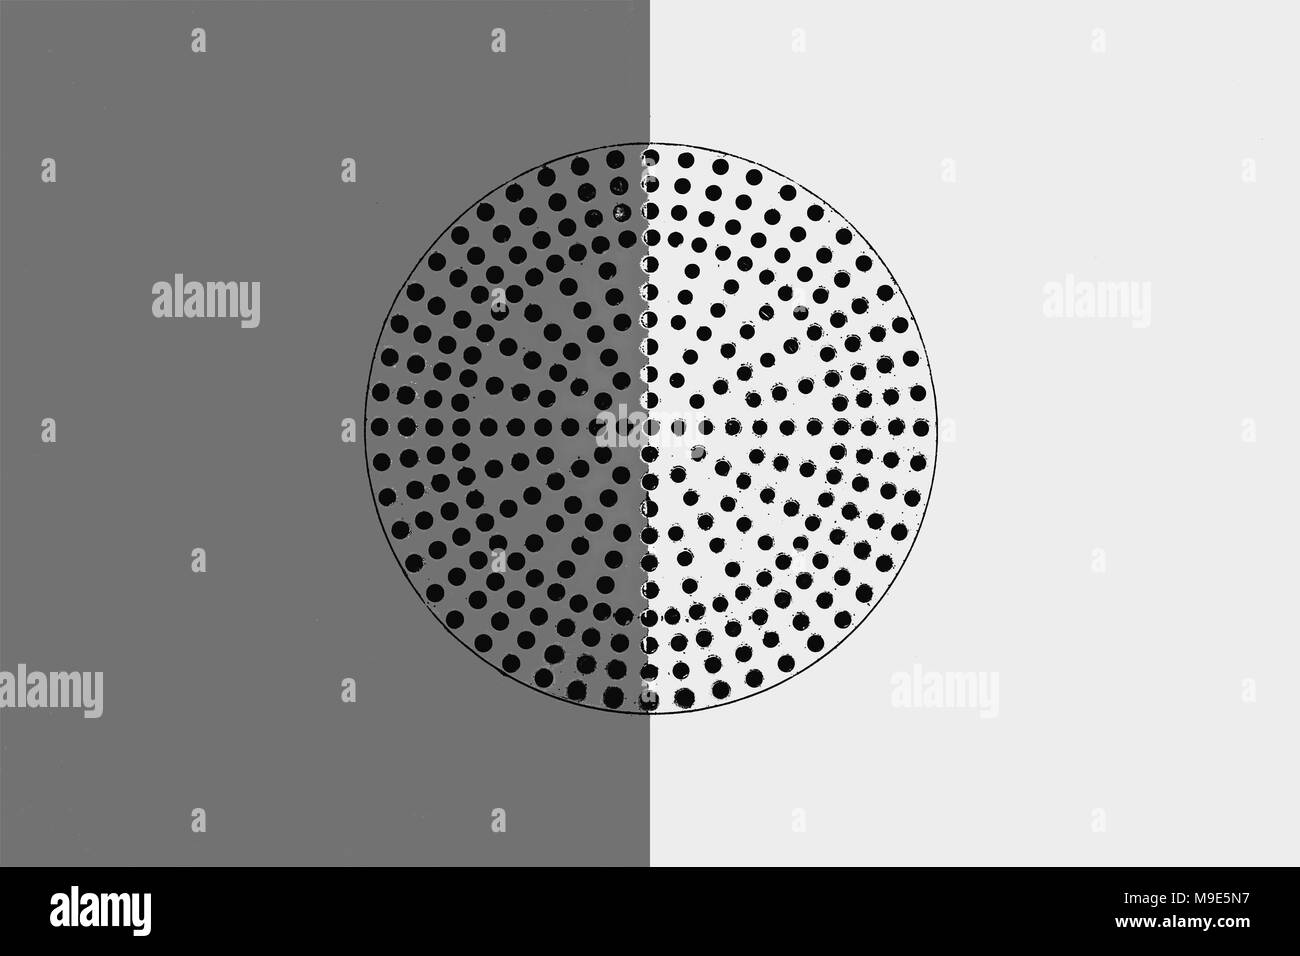 Metal surface painted in grey and white. Black circle with a lot of small perforated holes in the middle. Industrial pattern Stock Photo